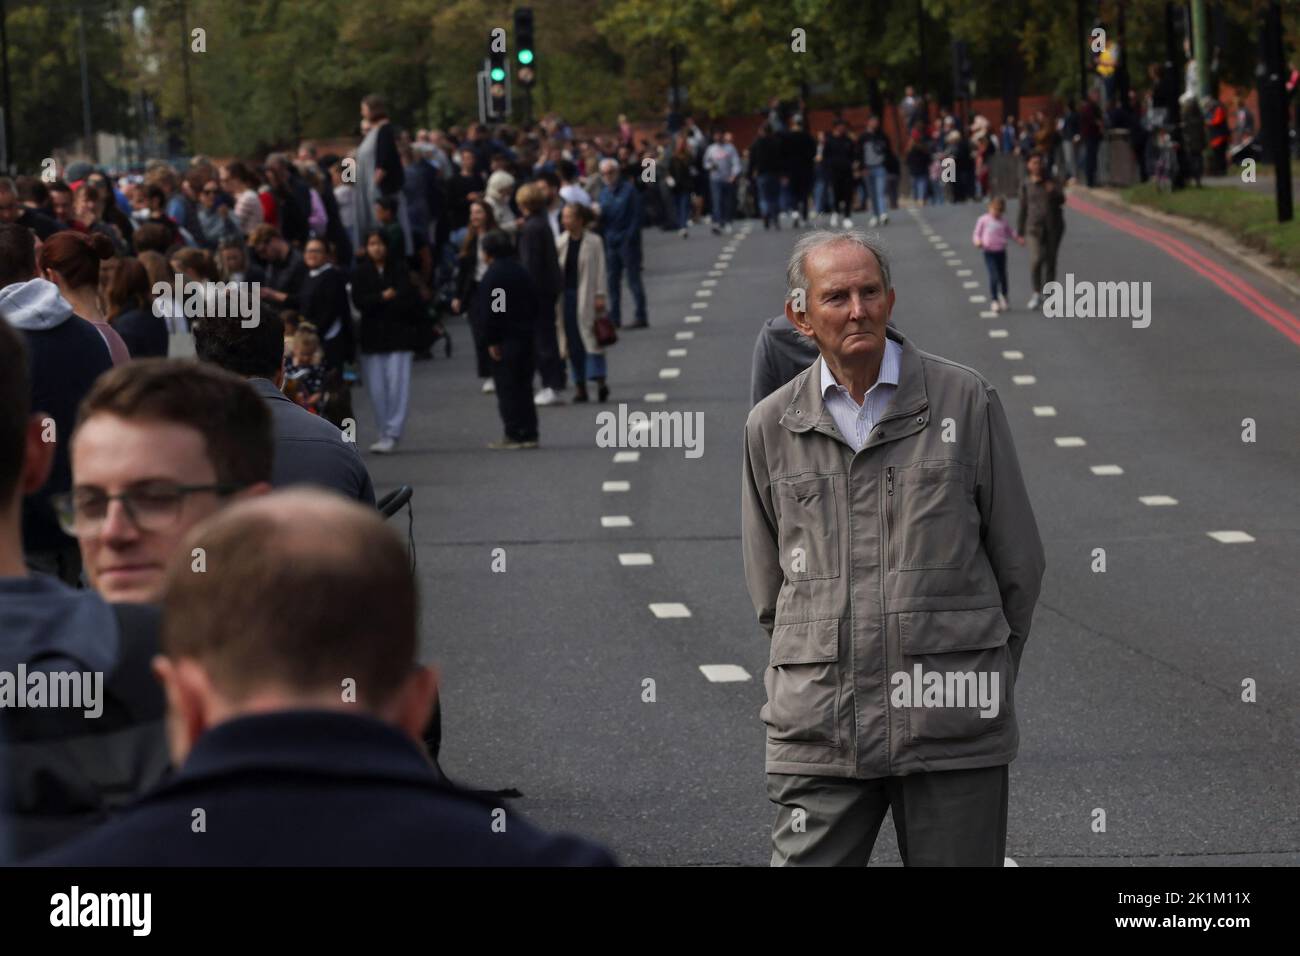 People gather, on the day of the state funeral and burial of Britain's Queen Elizabeth, in London, Britain, September 19, 2022. REUTERS/Carlos Barria Stock Photo